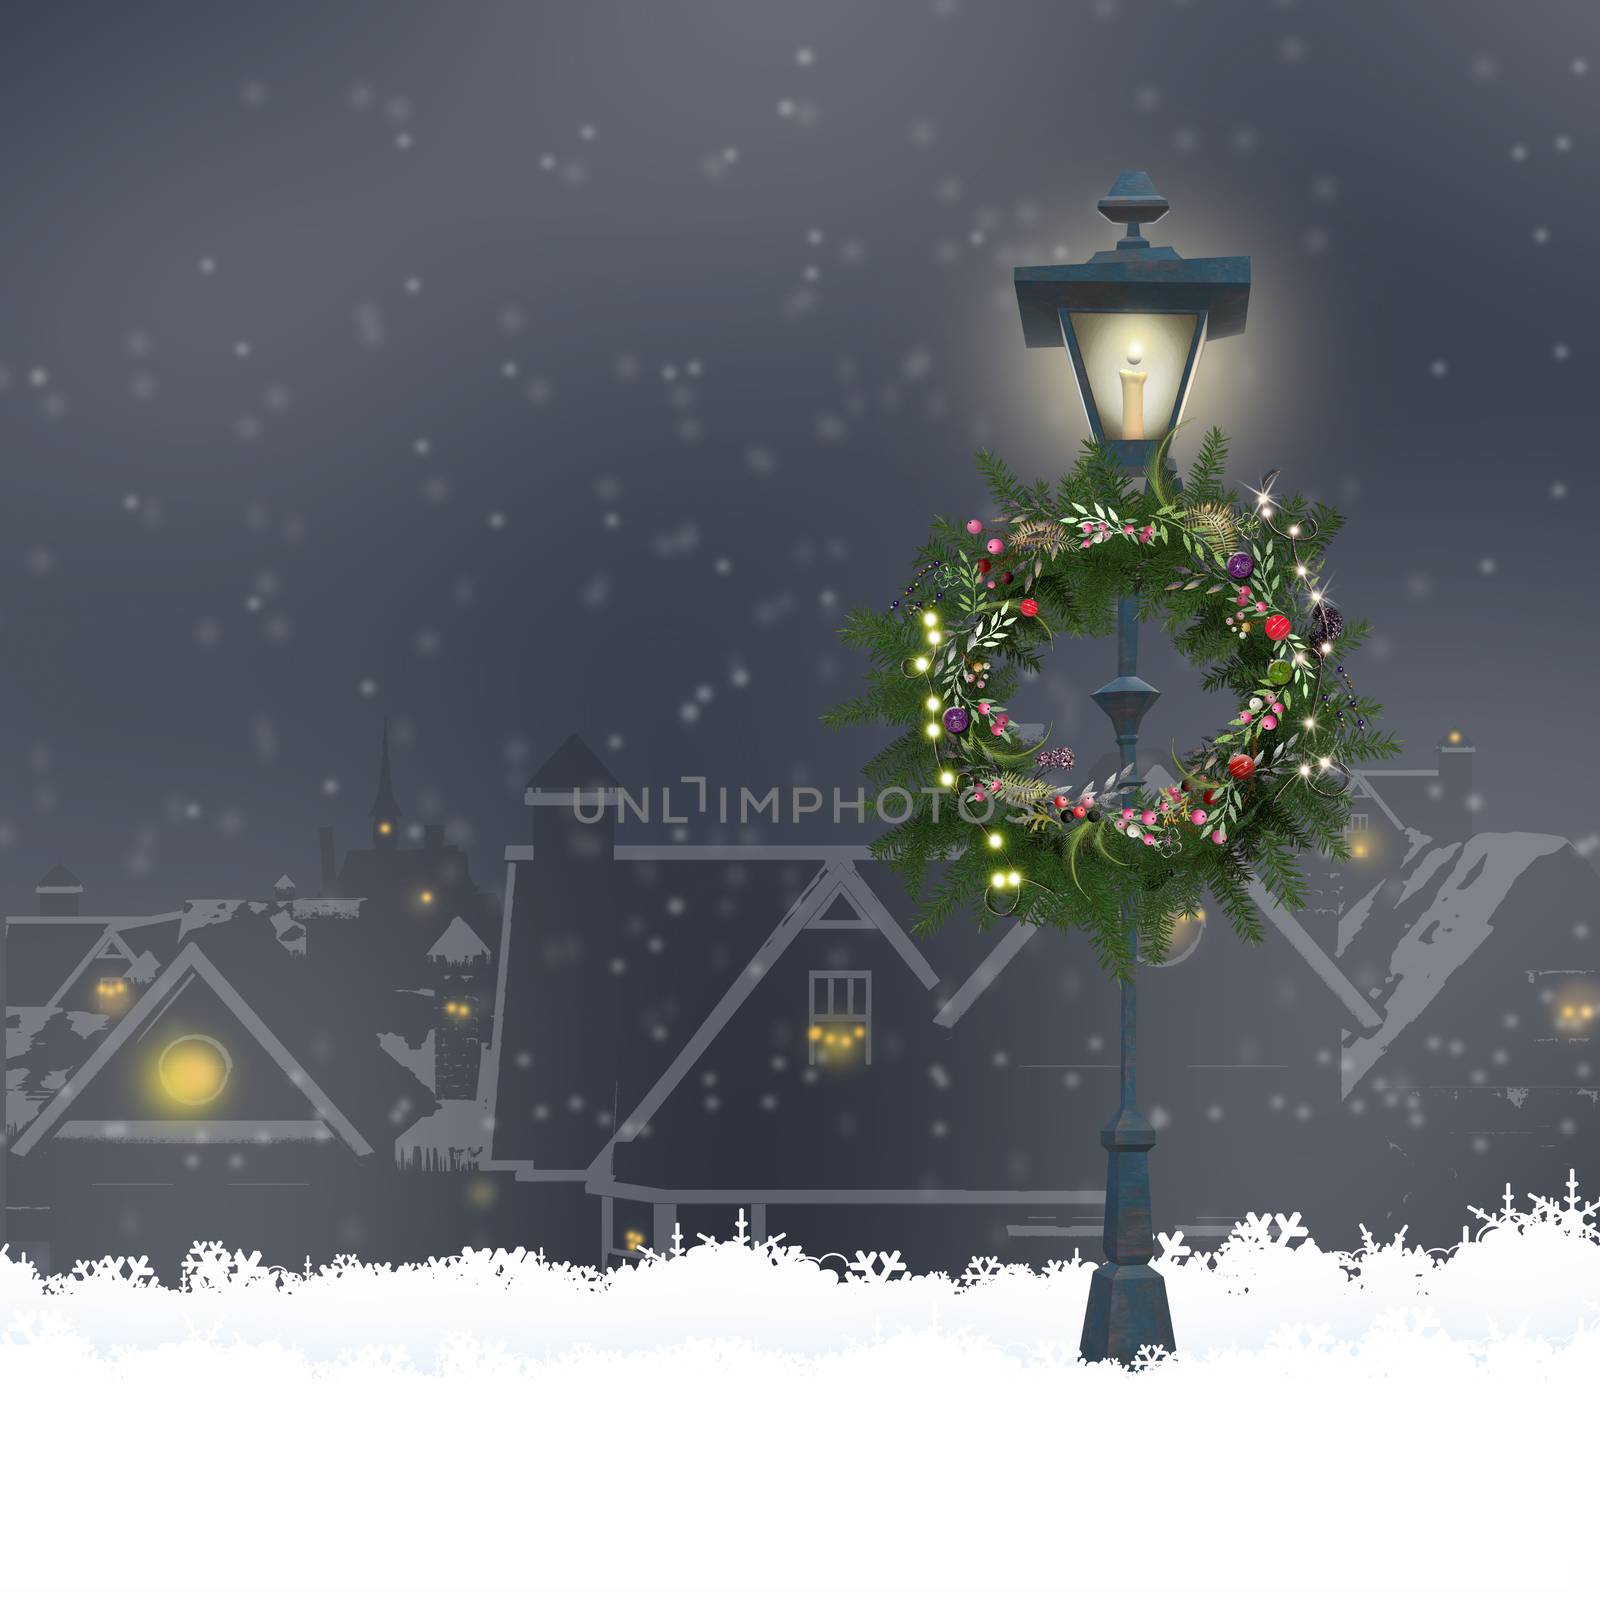 Christmas magic winter night cityscape with old town, luminous street lantern, floral wreath, snow flakes in 3D illustration